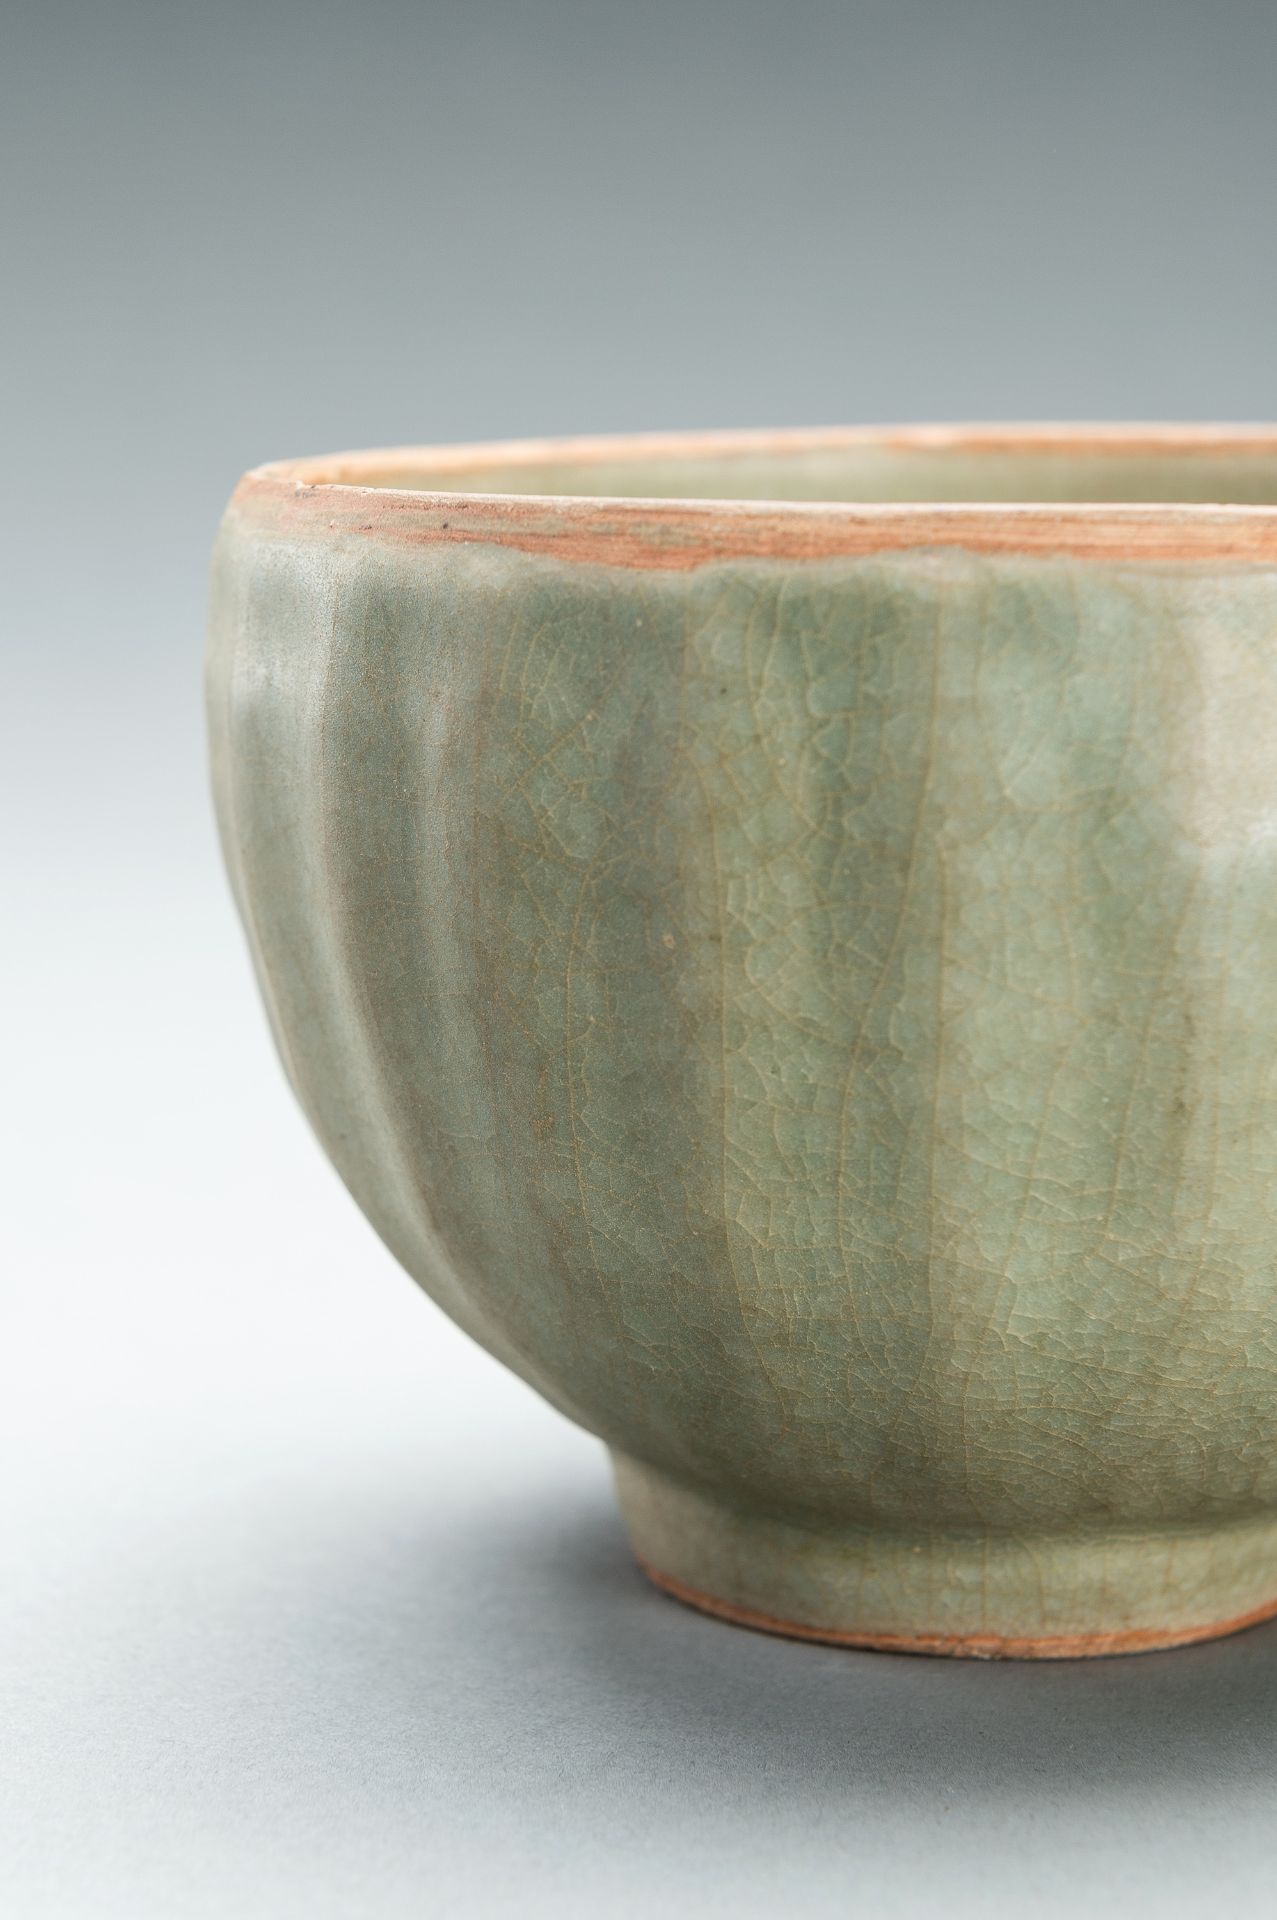 A LONGQUAN CELADON CERAMIC BOWL, SONG DYNASTY - Image 2 of 10